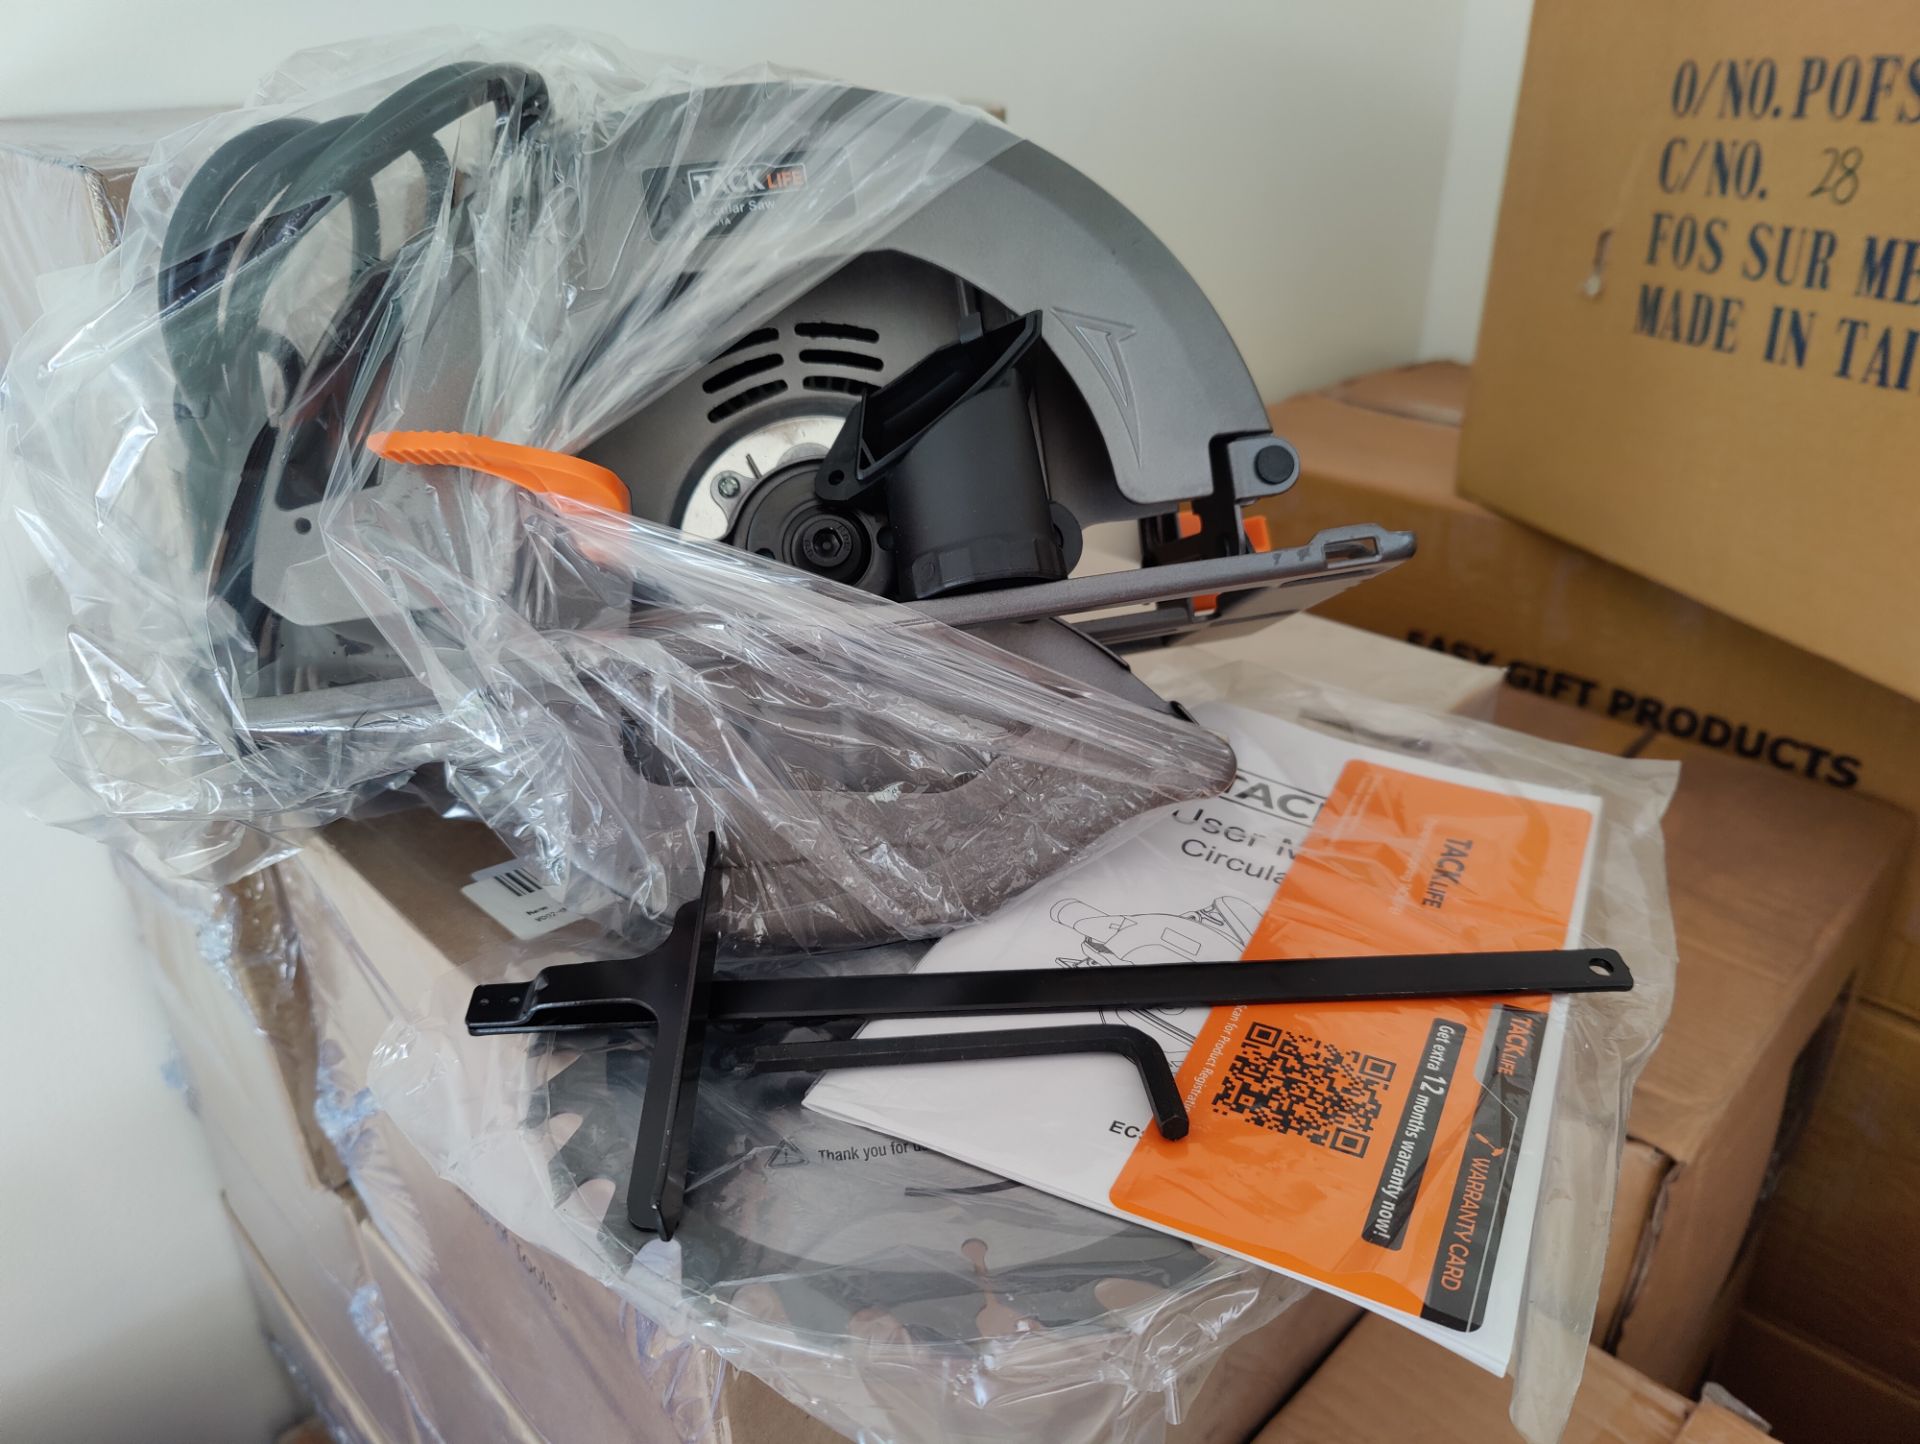 Clearance Joblot 4 x New Boxed Tacklife Electric Circular Saw,1500W, 5000 RPM With Bevel Cuts 2-3... - Image 3 of 4